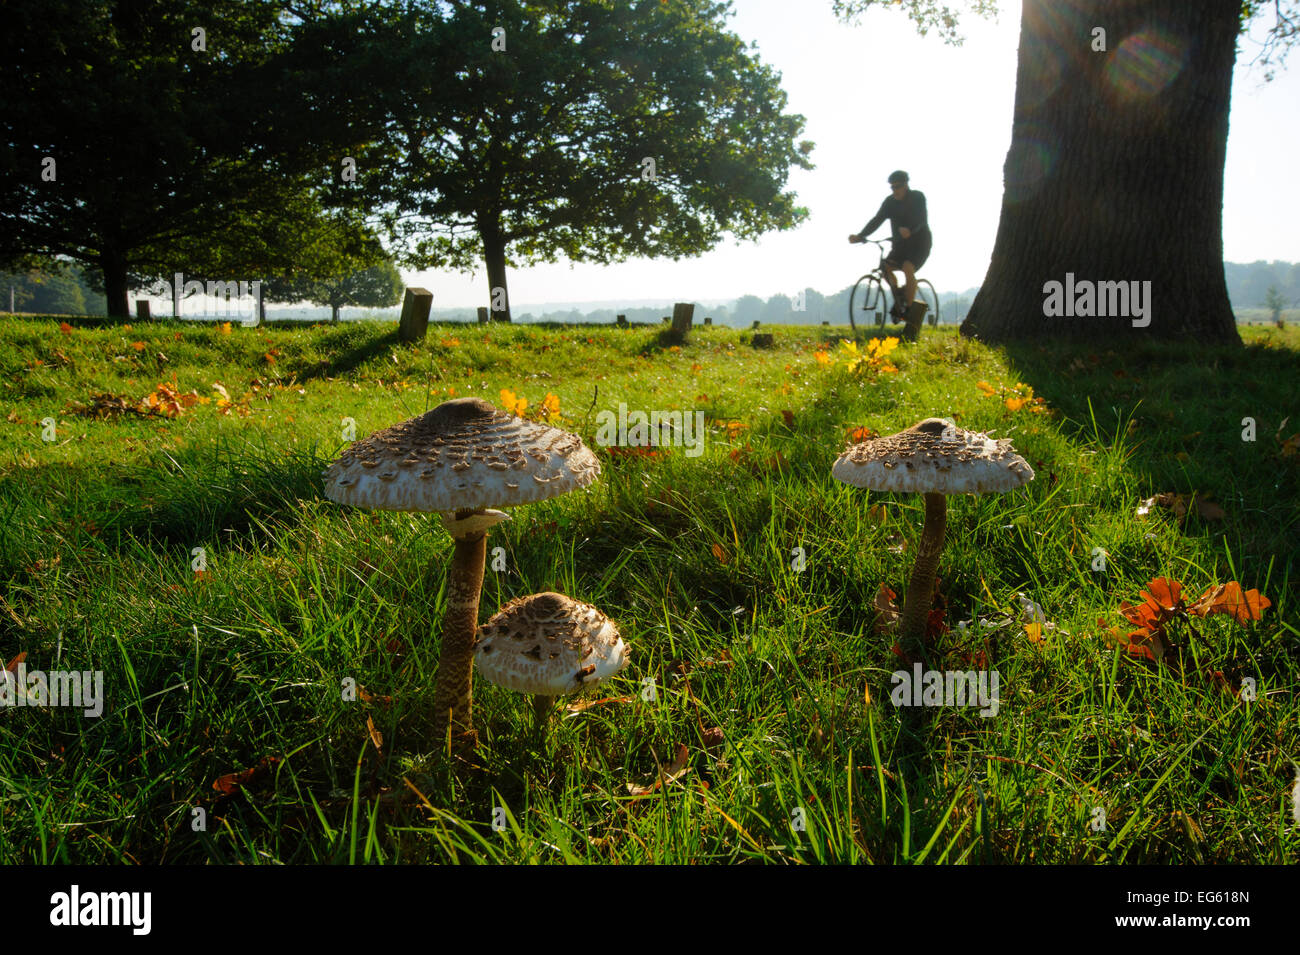 Parasol mushrooms (Lepiota procera), Richmond Park, London, England, UK, September. Did you know? One way to identify mushrooms is the colour of the spores, for example this mushroom's spores are white, but a poisonous lookalike has green spores. Stock Photo